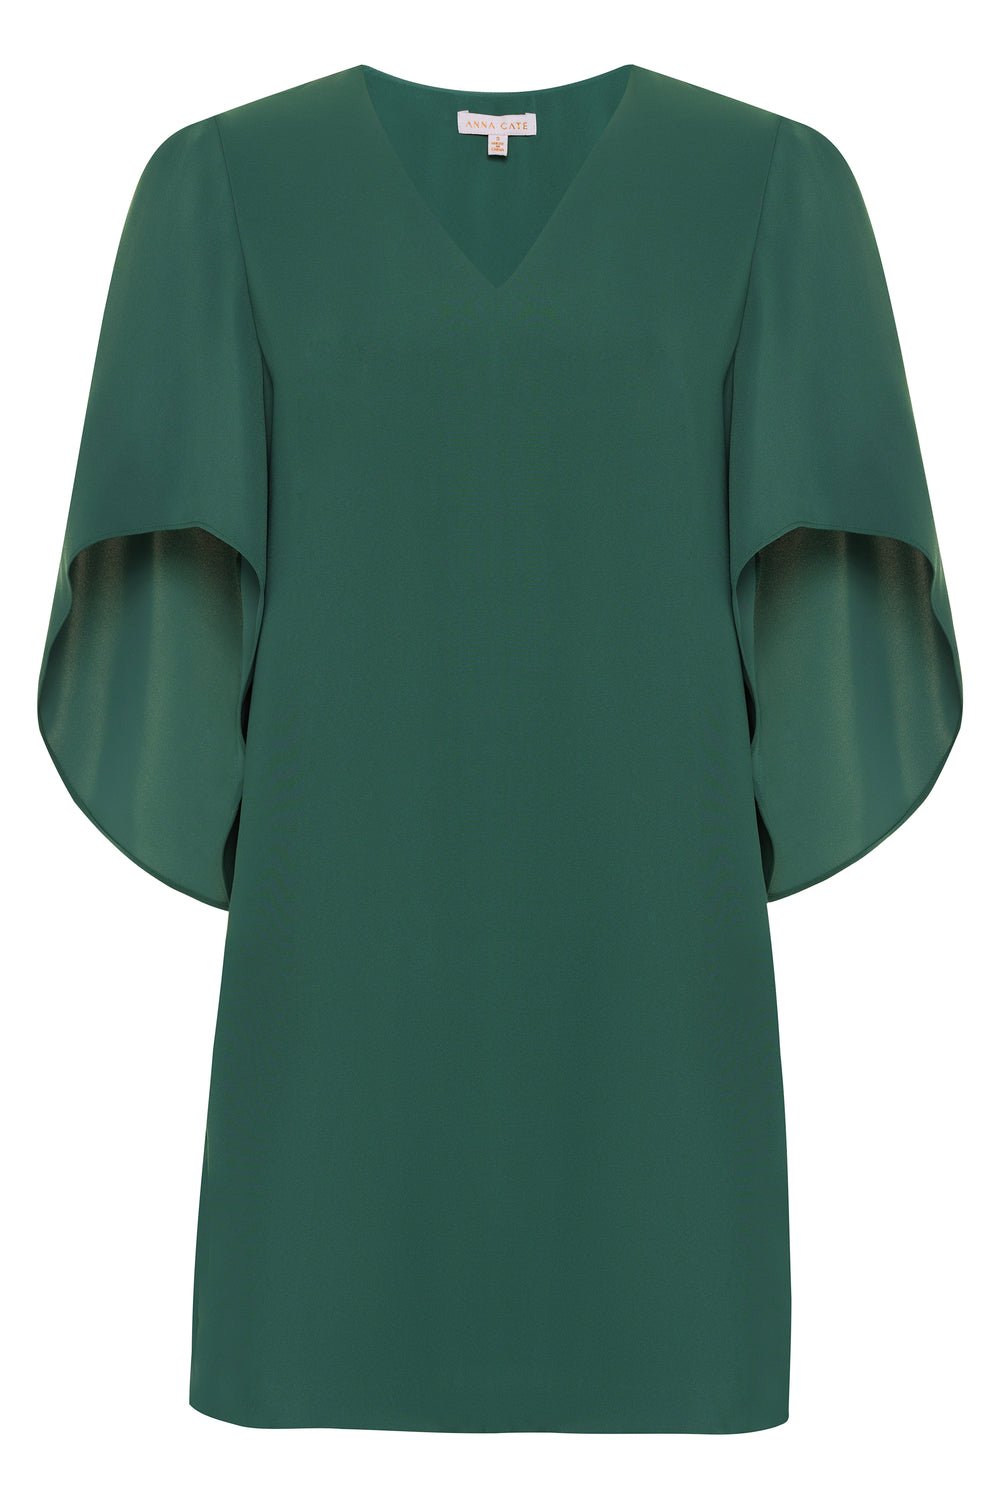 Anna Cate - Meredith S/S Dress: Emerald - Shorely Chic Boutique